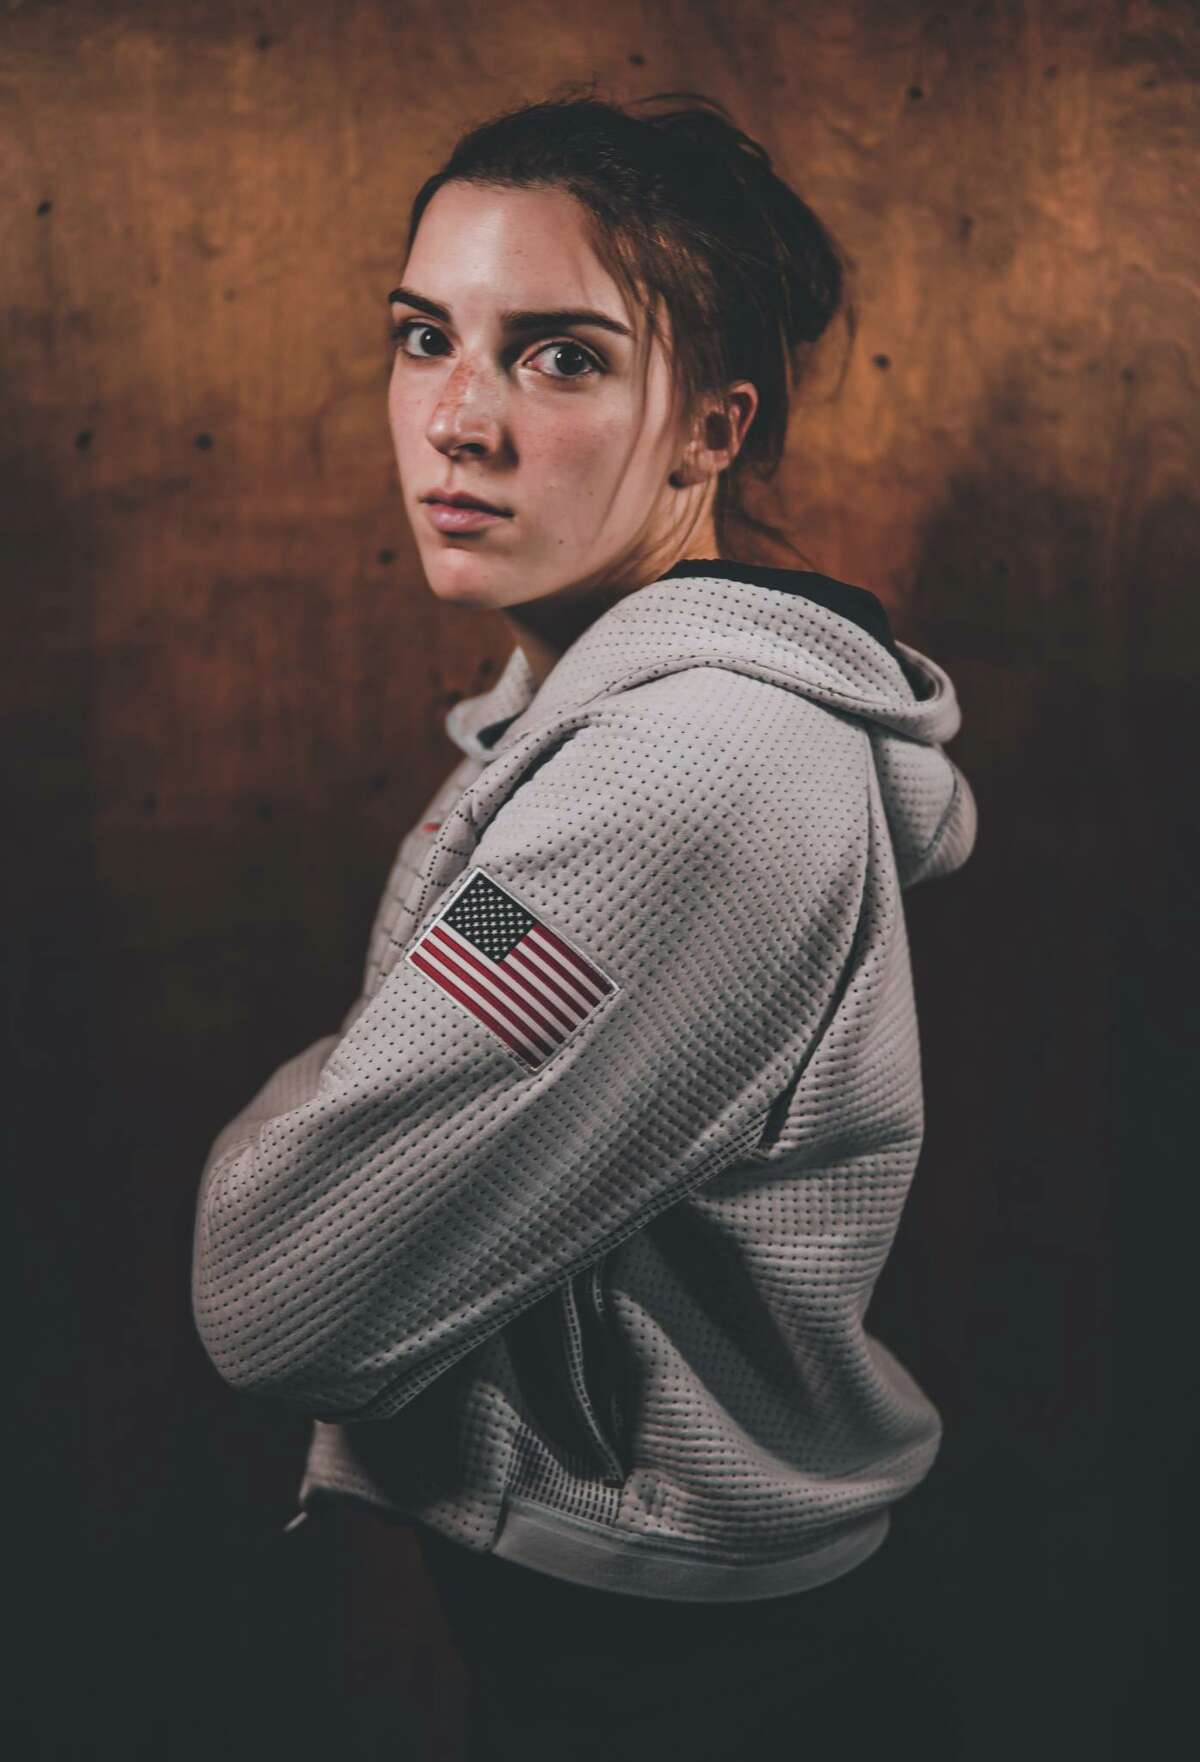 Brianna Salinaro graduated from Sacred Heart University in 2020 and will be the first female to compete in parataekwondo for Team USA. Salinaro is the first athlete with cerebral palsy to compete in the sport on the world stage.